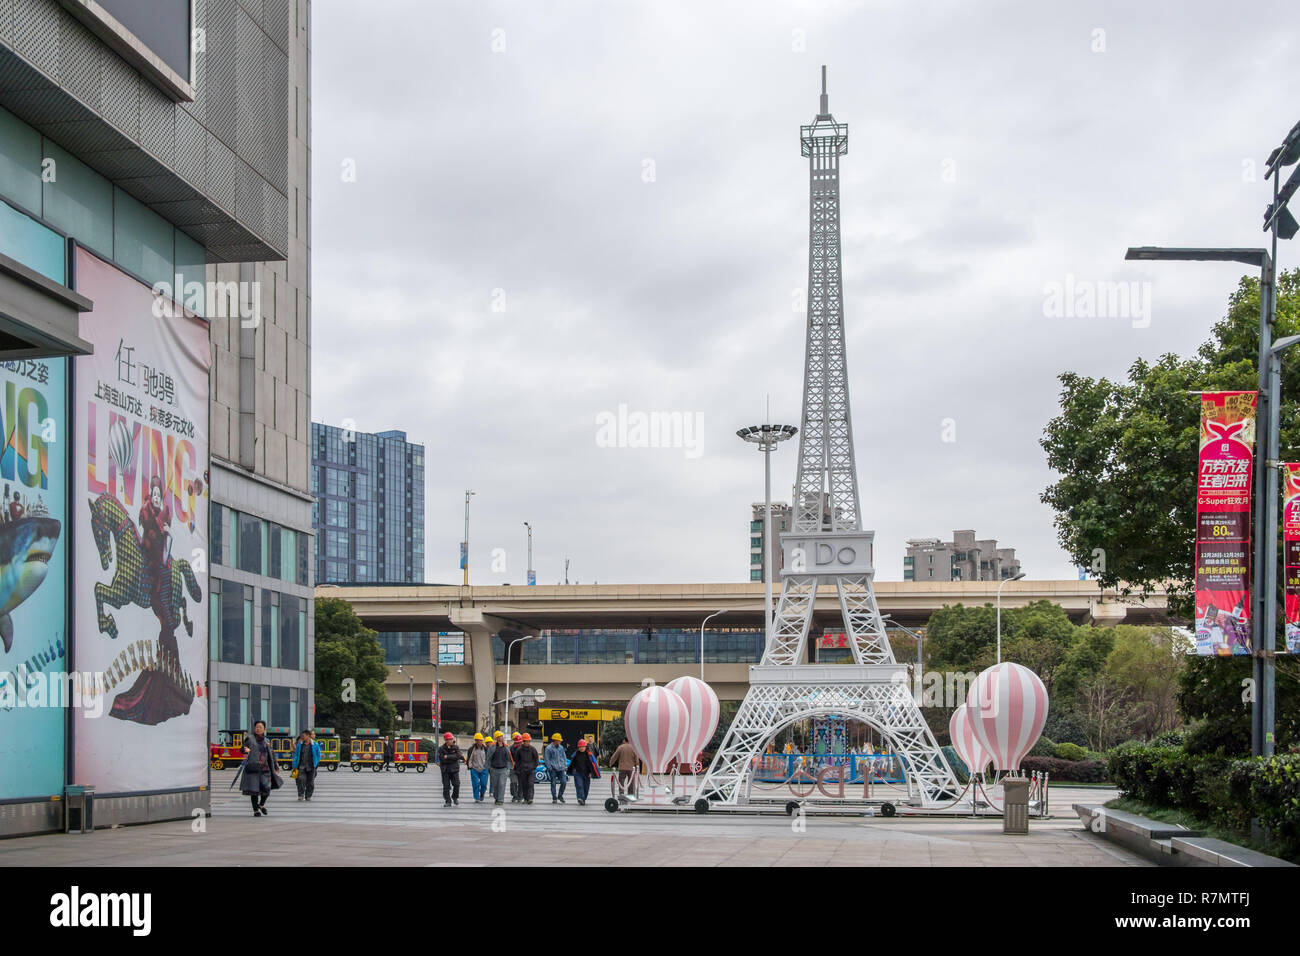 Shanghai, China. 08th Dec, 2018. A 17-meter-tall Eiffel Tower statue can be  seen in Shanghai. Credit: SIPA ASIA/Pacific Press/Alamy Live News Stock  Photo - Alamy